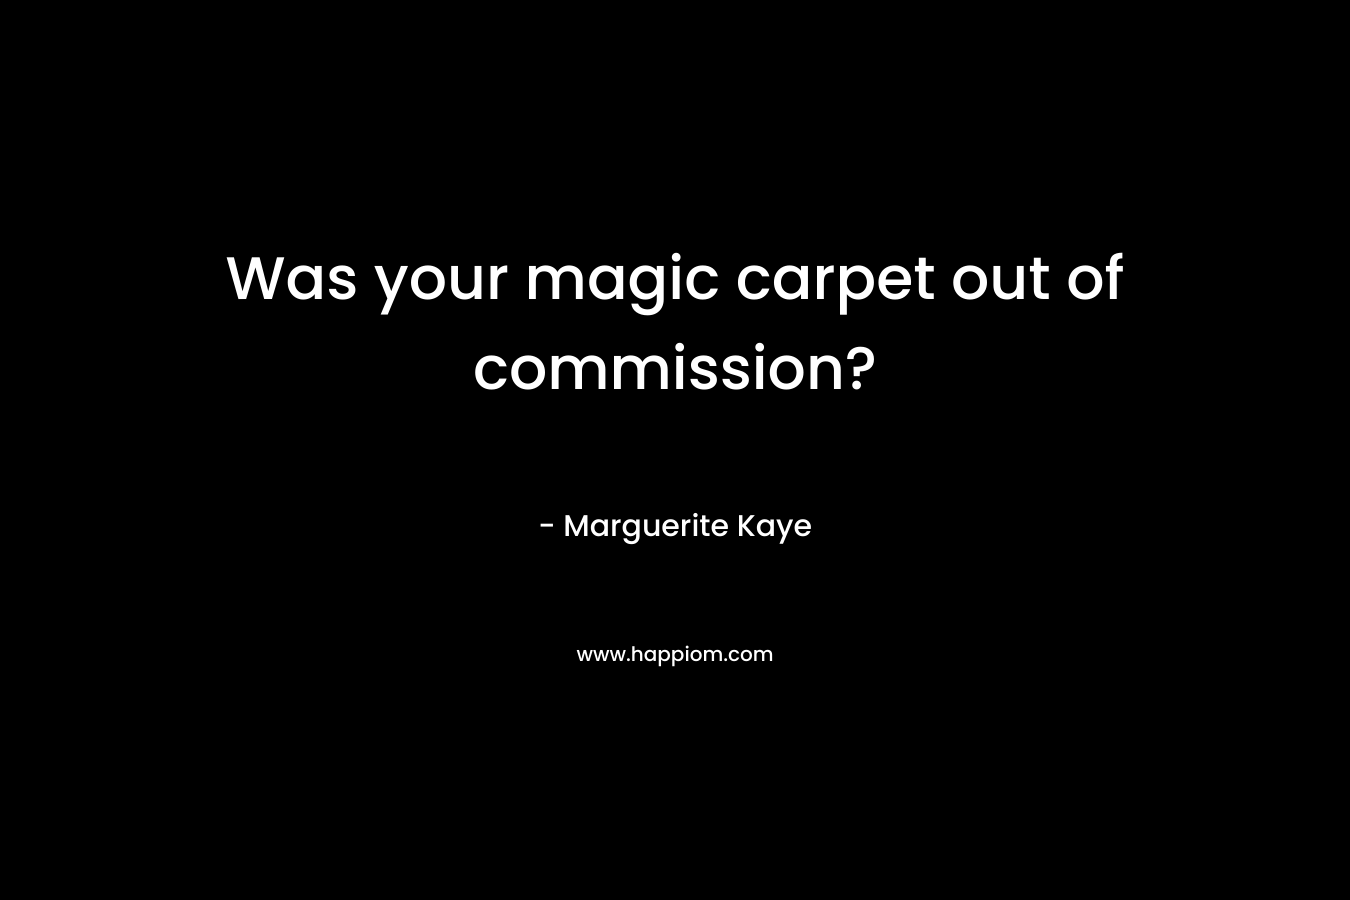 Was your magic carpet out of commission? – Marguerite Kaye